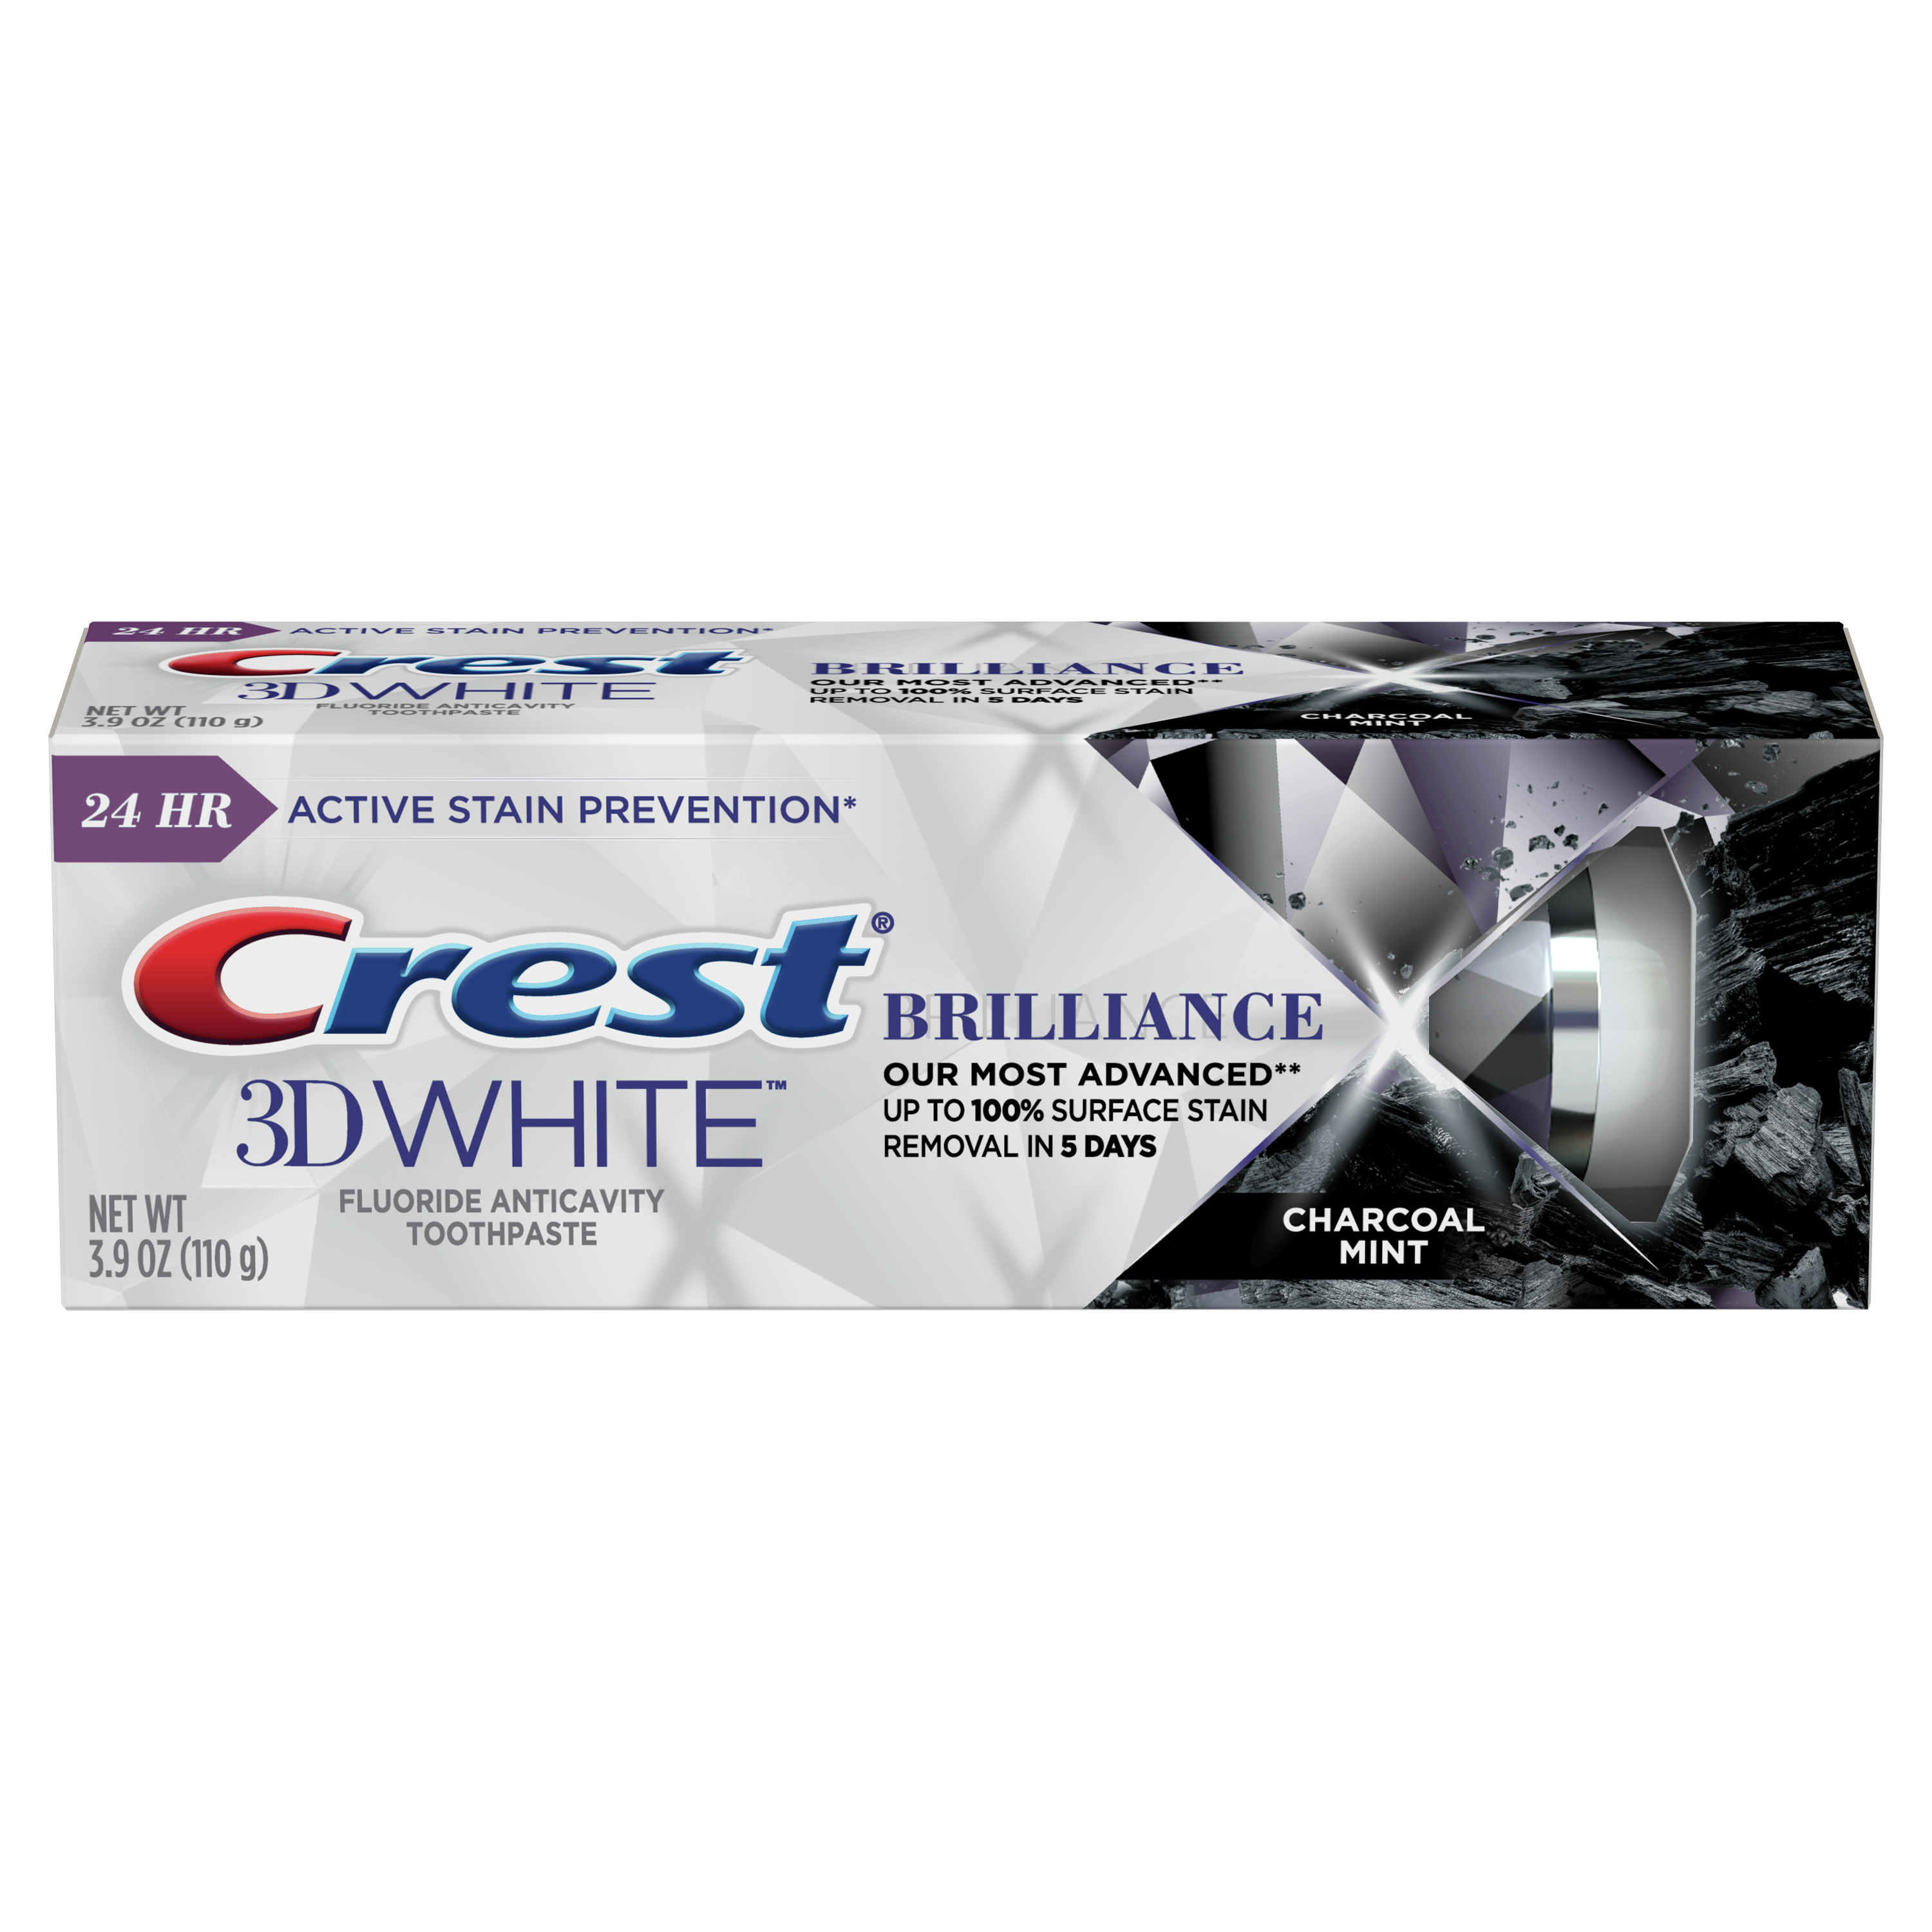 Crest 3D White Brilliance Charcoal Teeth Whitening Toothpaste, Mint, 3.9 oz - image 1 of 11